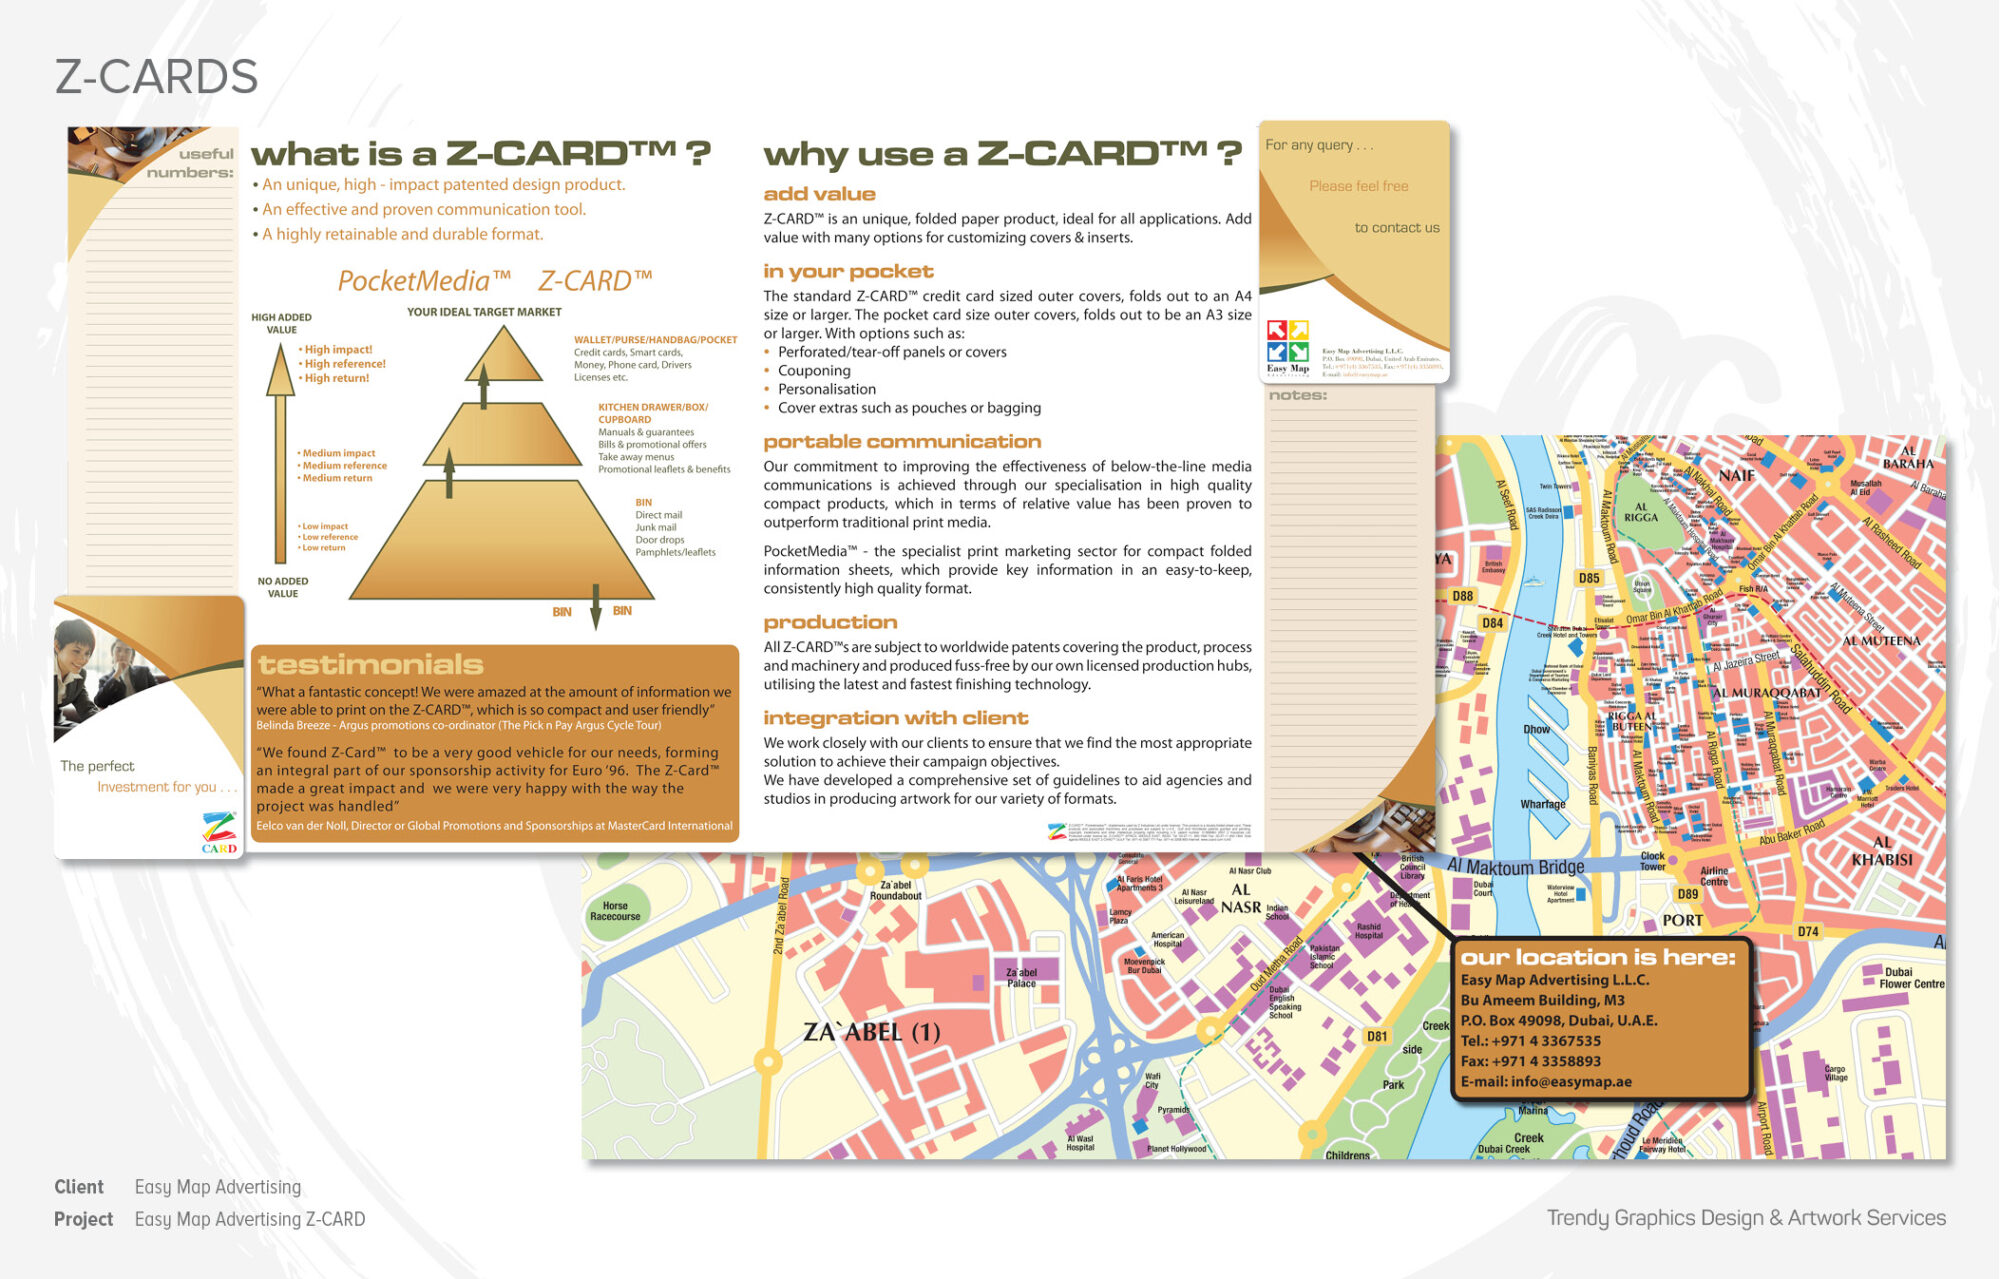 Easy Map Advertising – Z-CARD